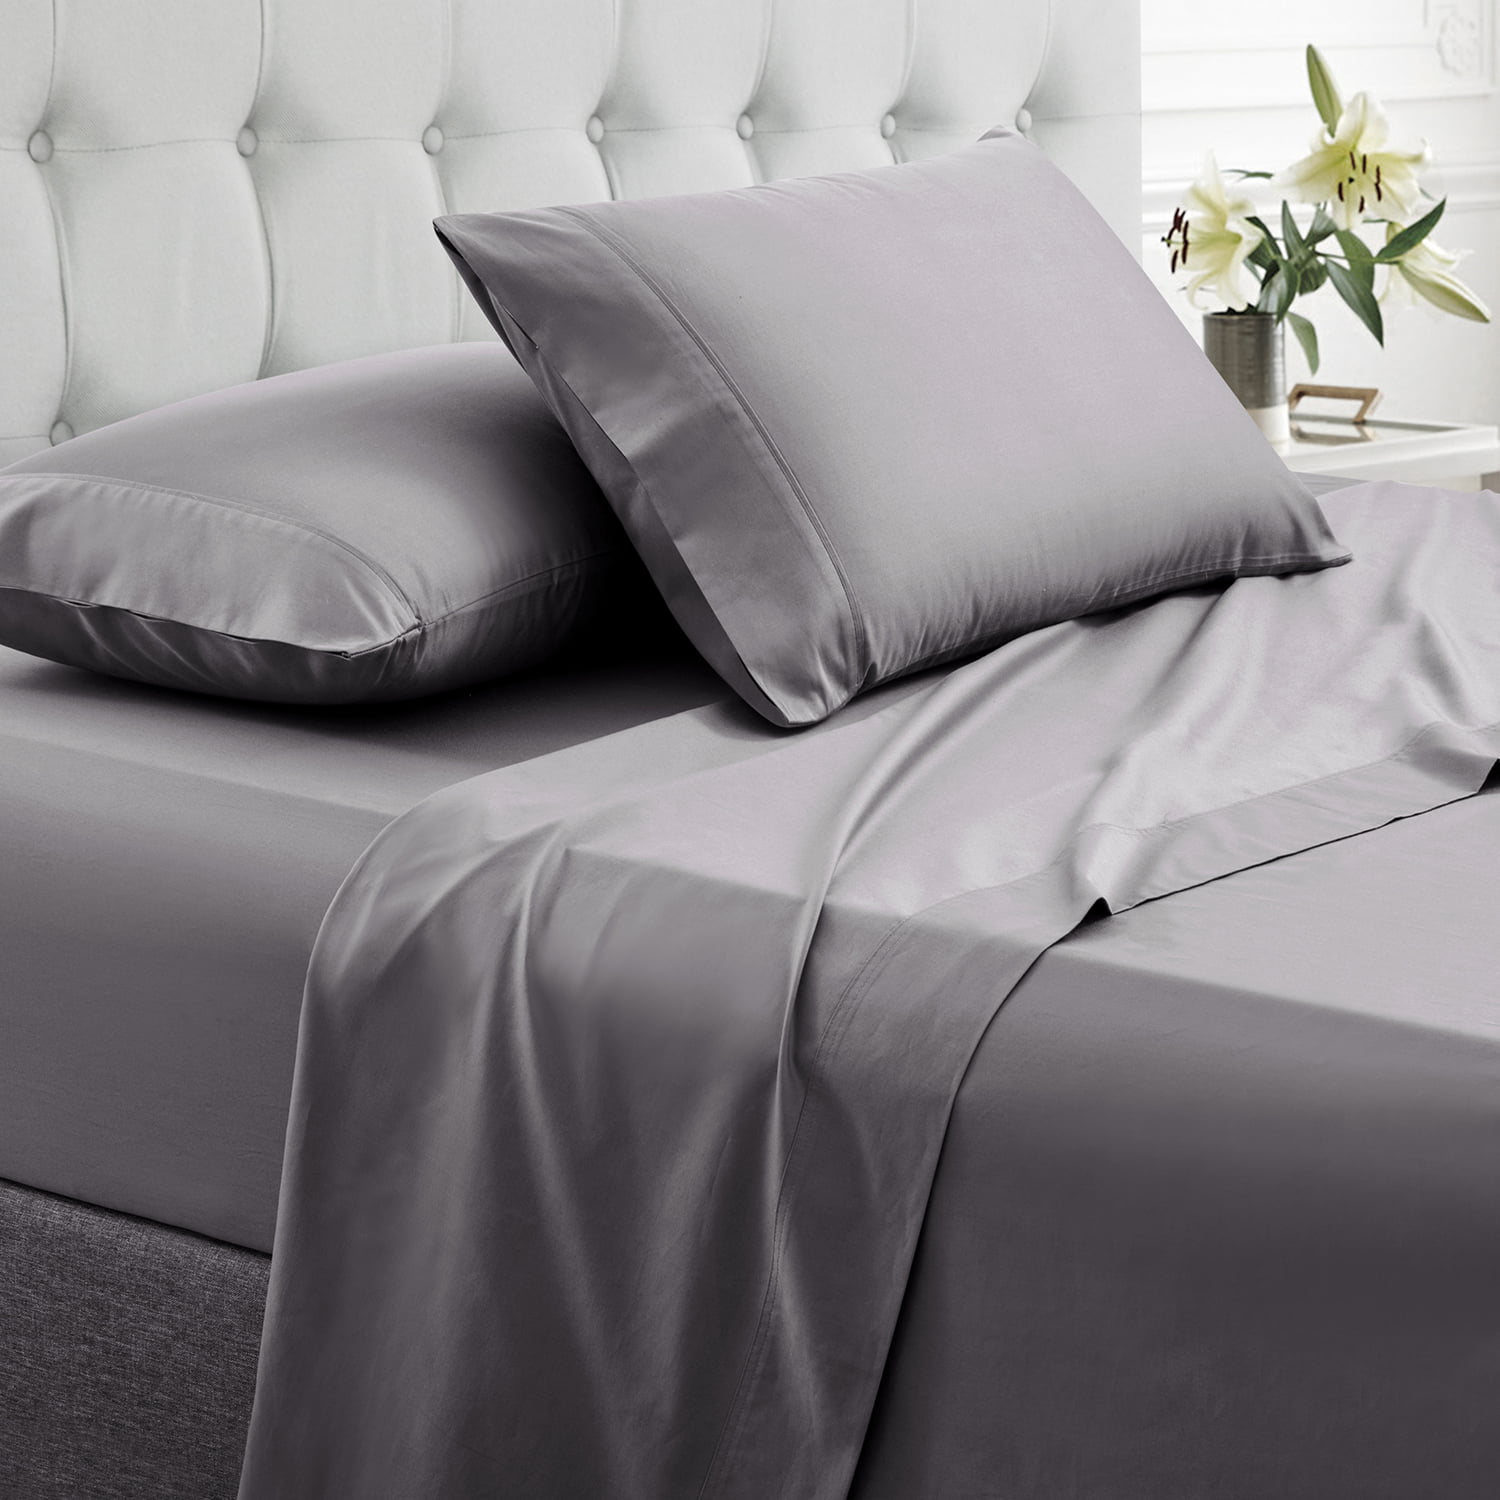 FLAT 100% EGYPTIAN COTTON ALL SIZES 200 THREAD COUNT FITTED VALANCE SHEETS 